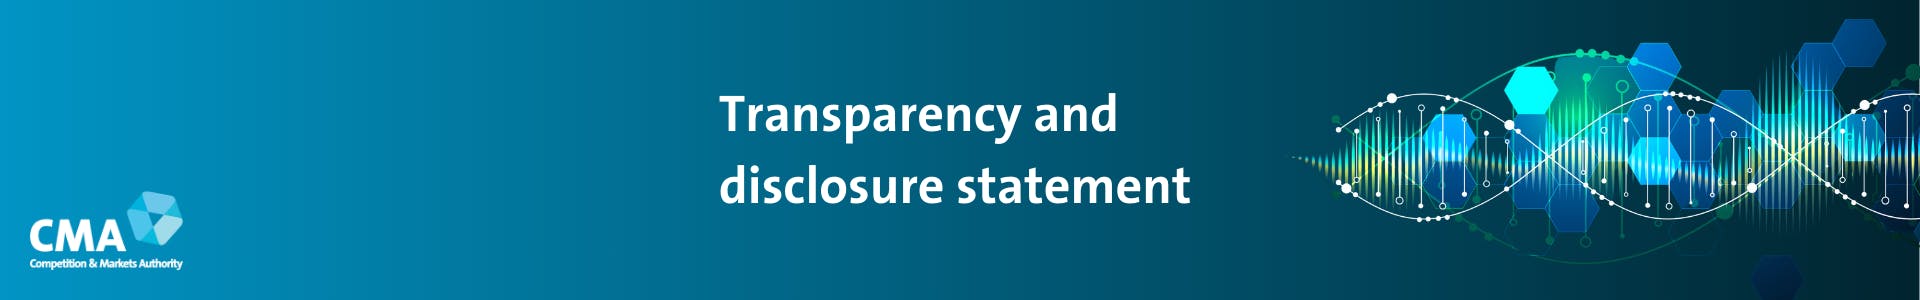 Transparency and disclosure statement